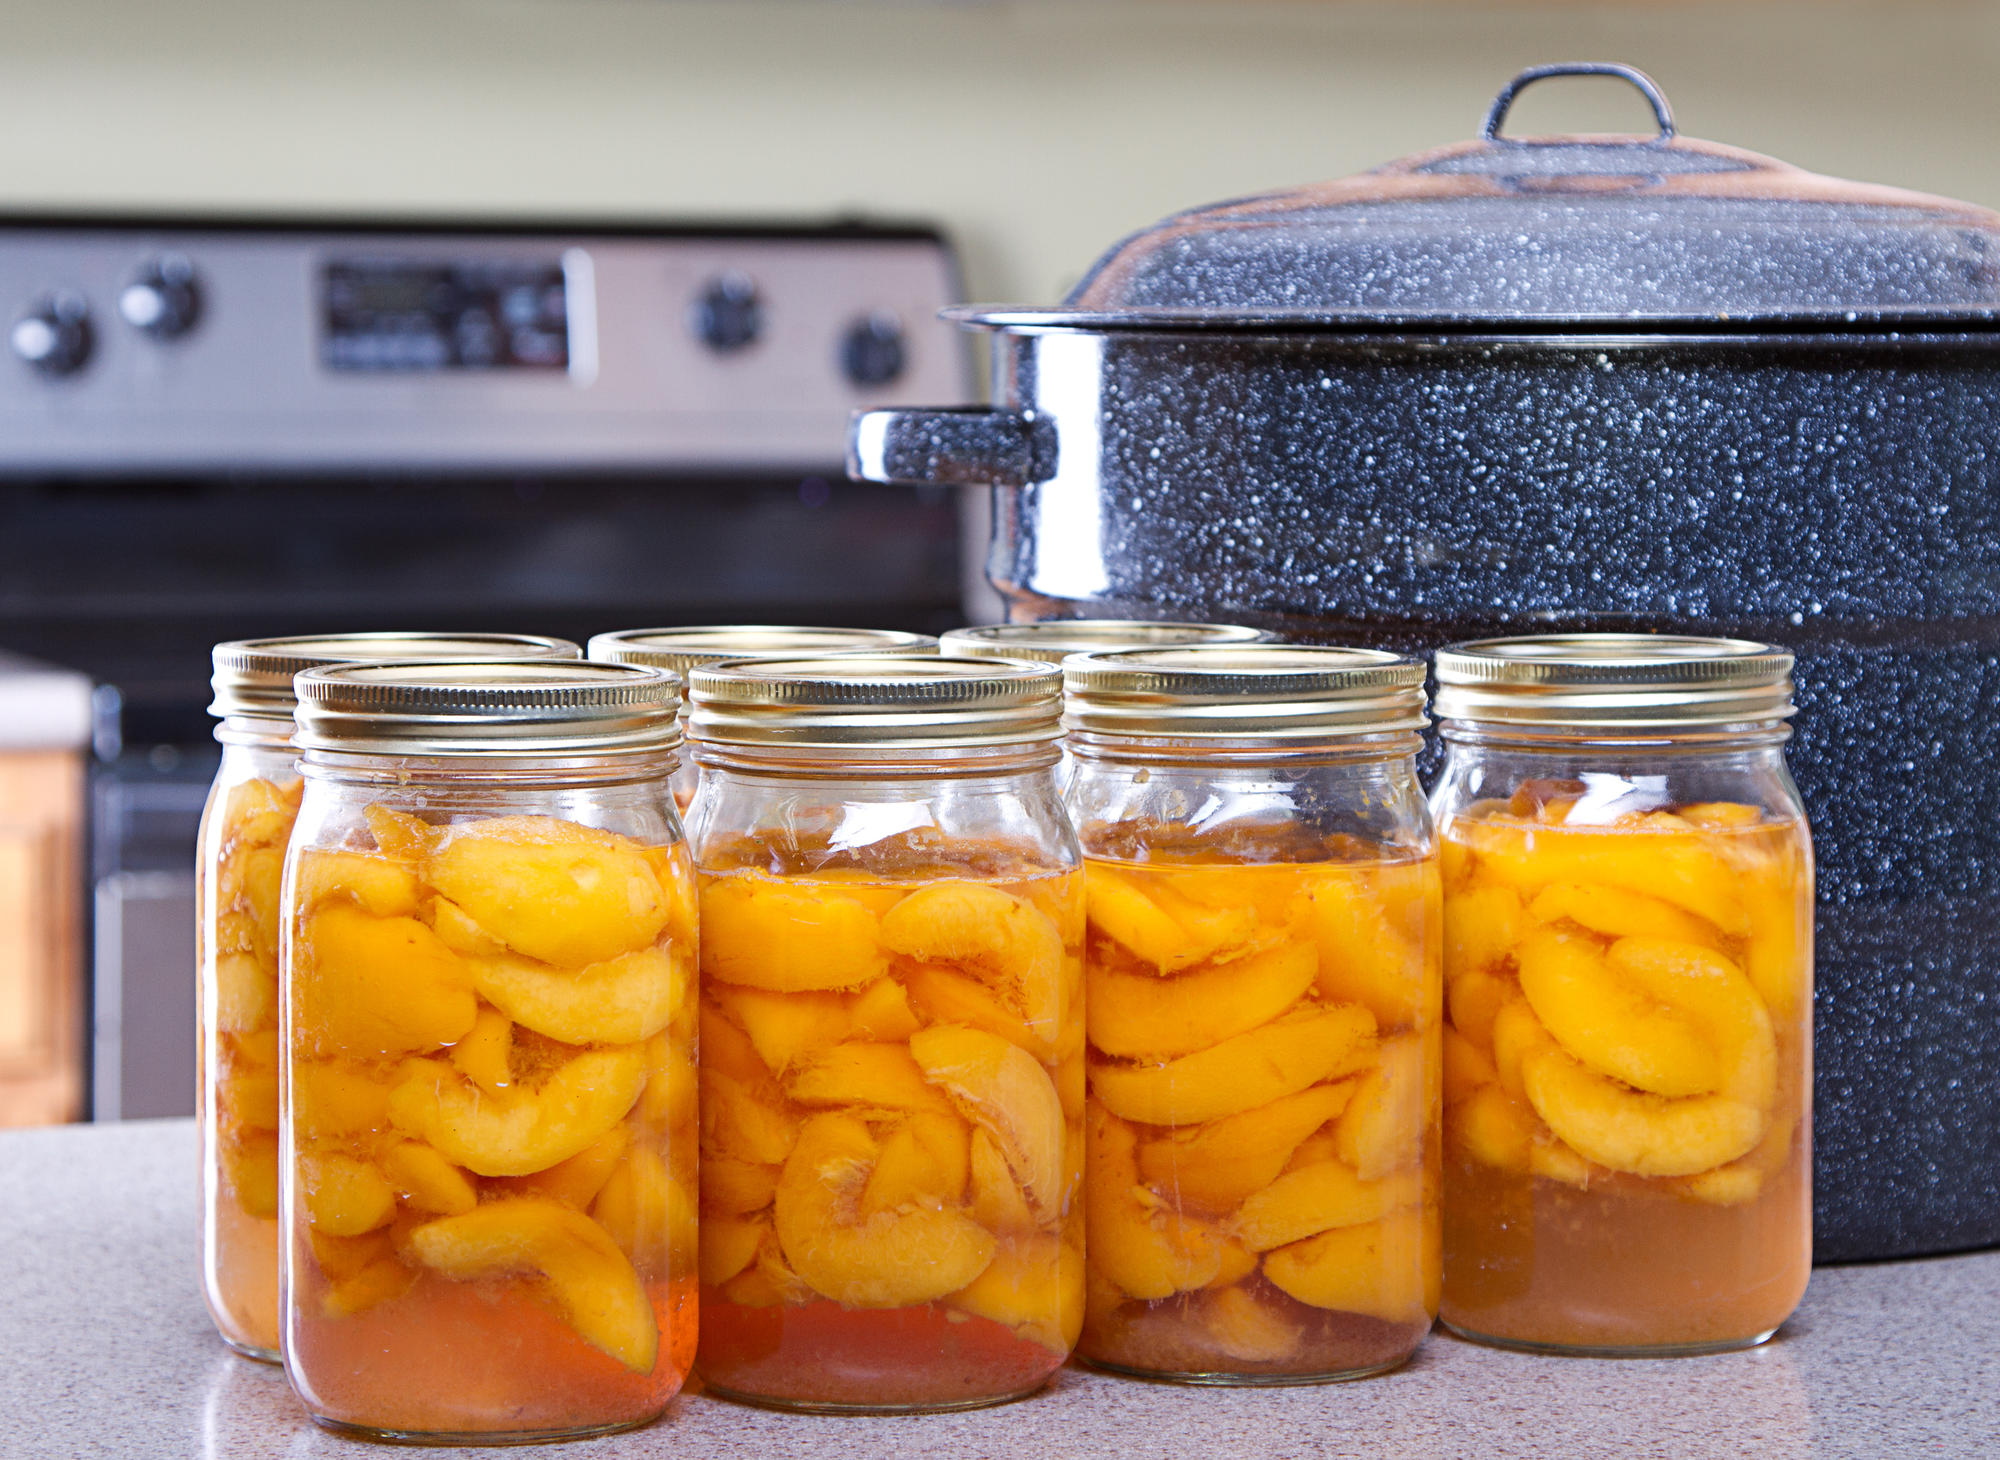 Put a Lid on It! Lids for Home Canning – Safe & Healthy Food for Your Family